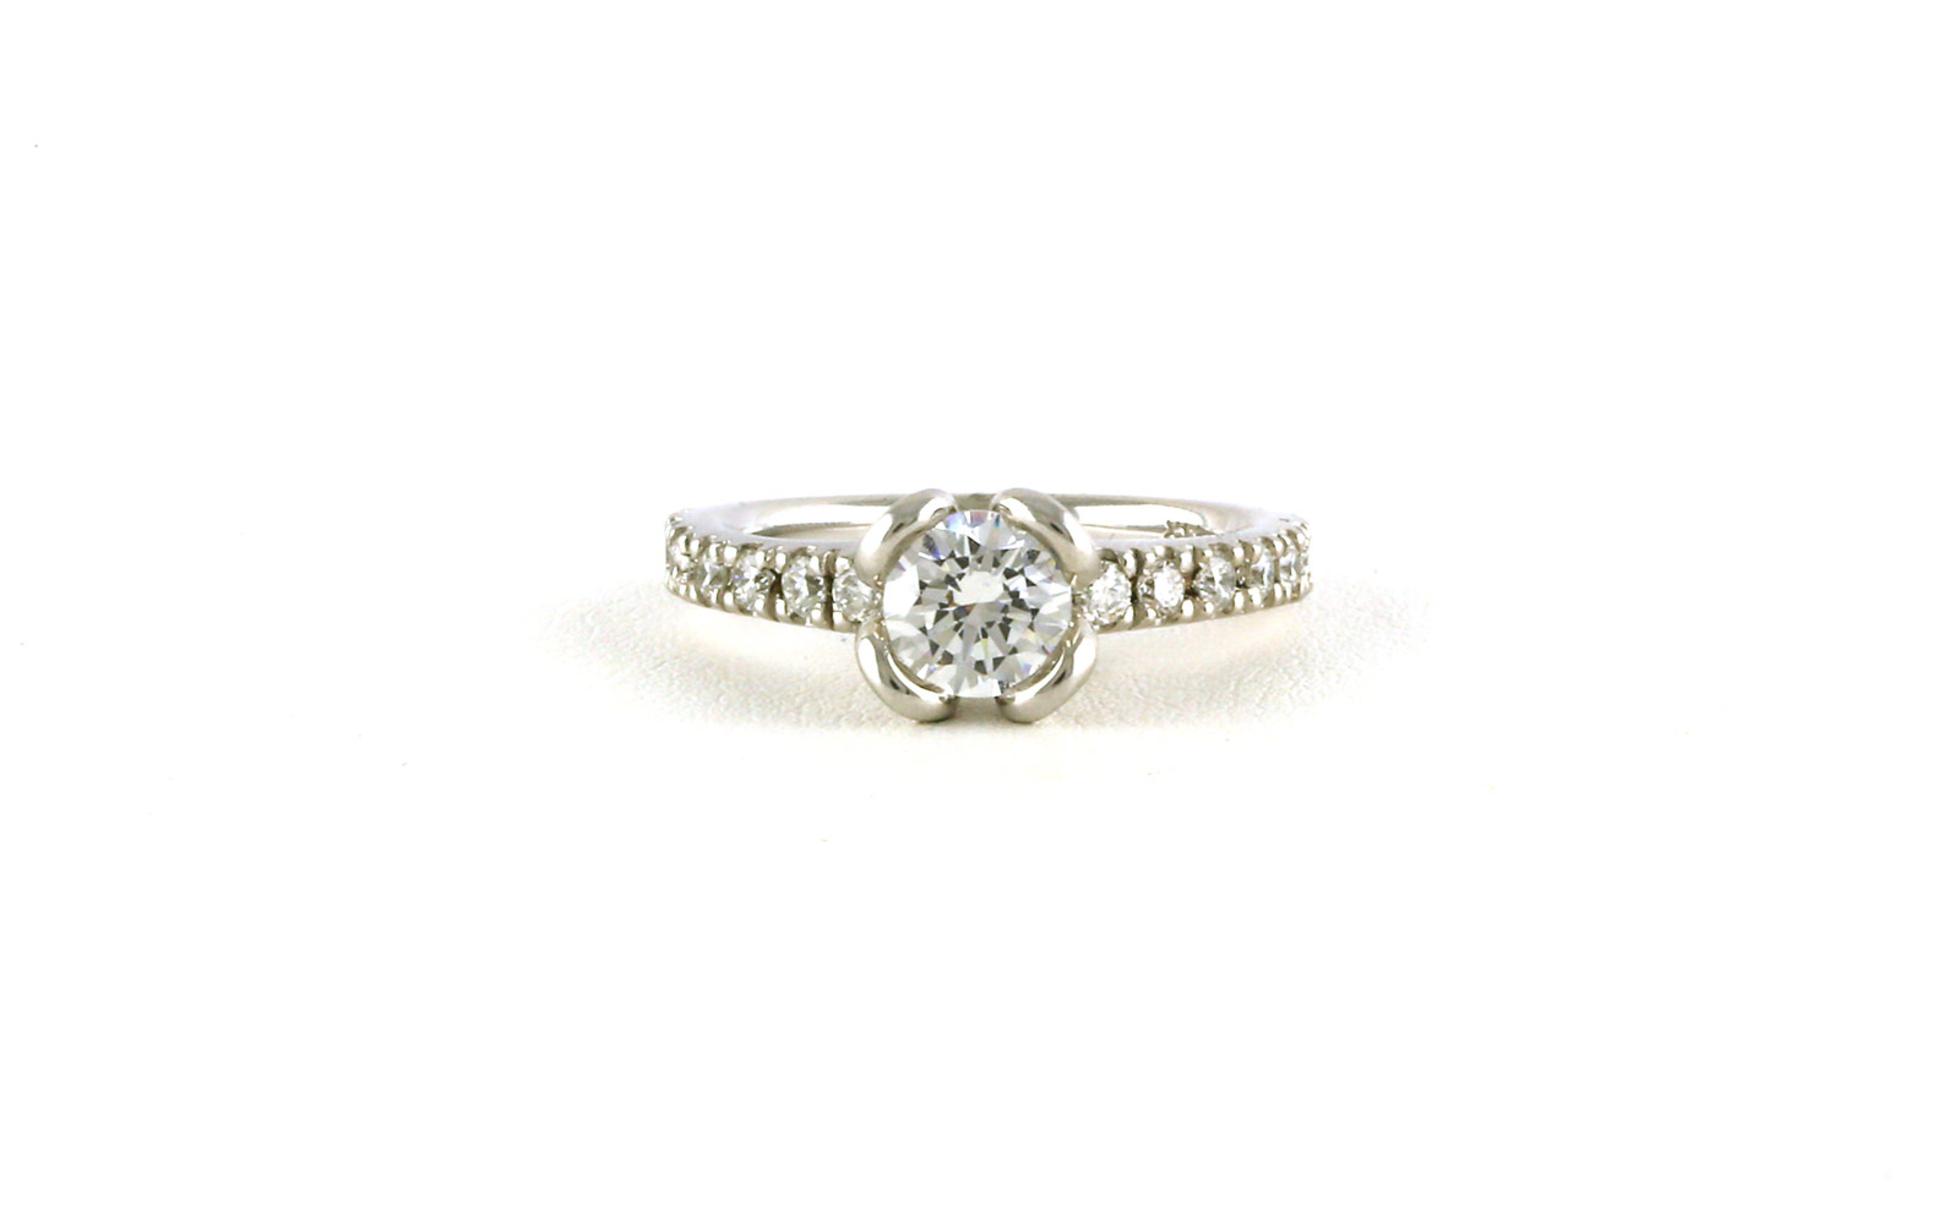 Tulip Engagement Ring Mounting with Diamond Accents in White Gold (0.48cts TWT)